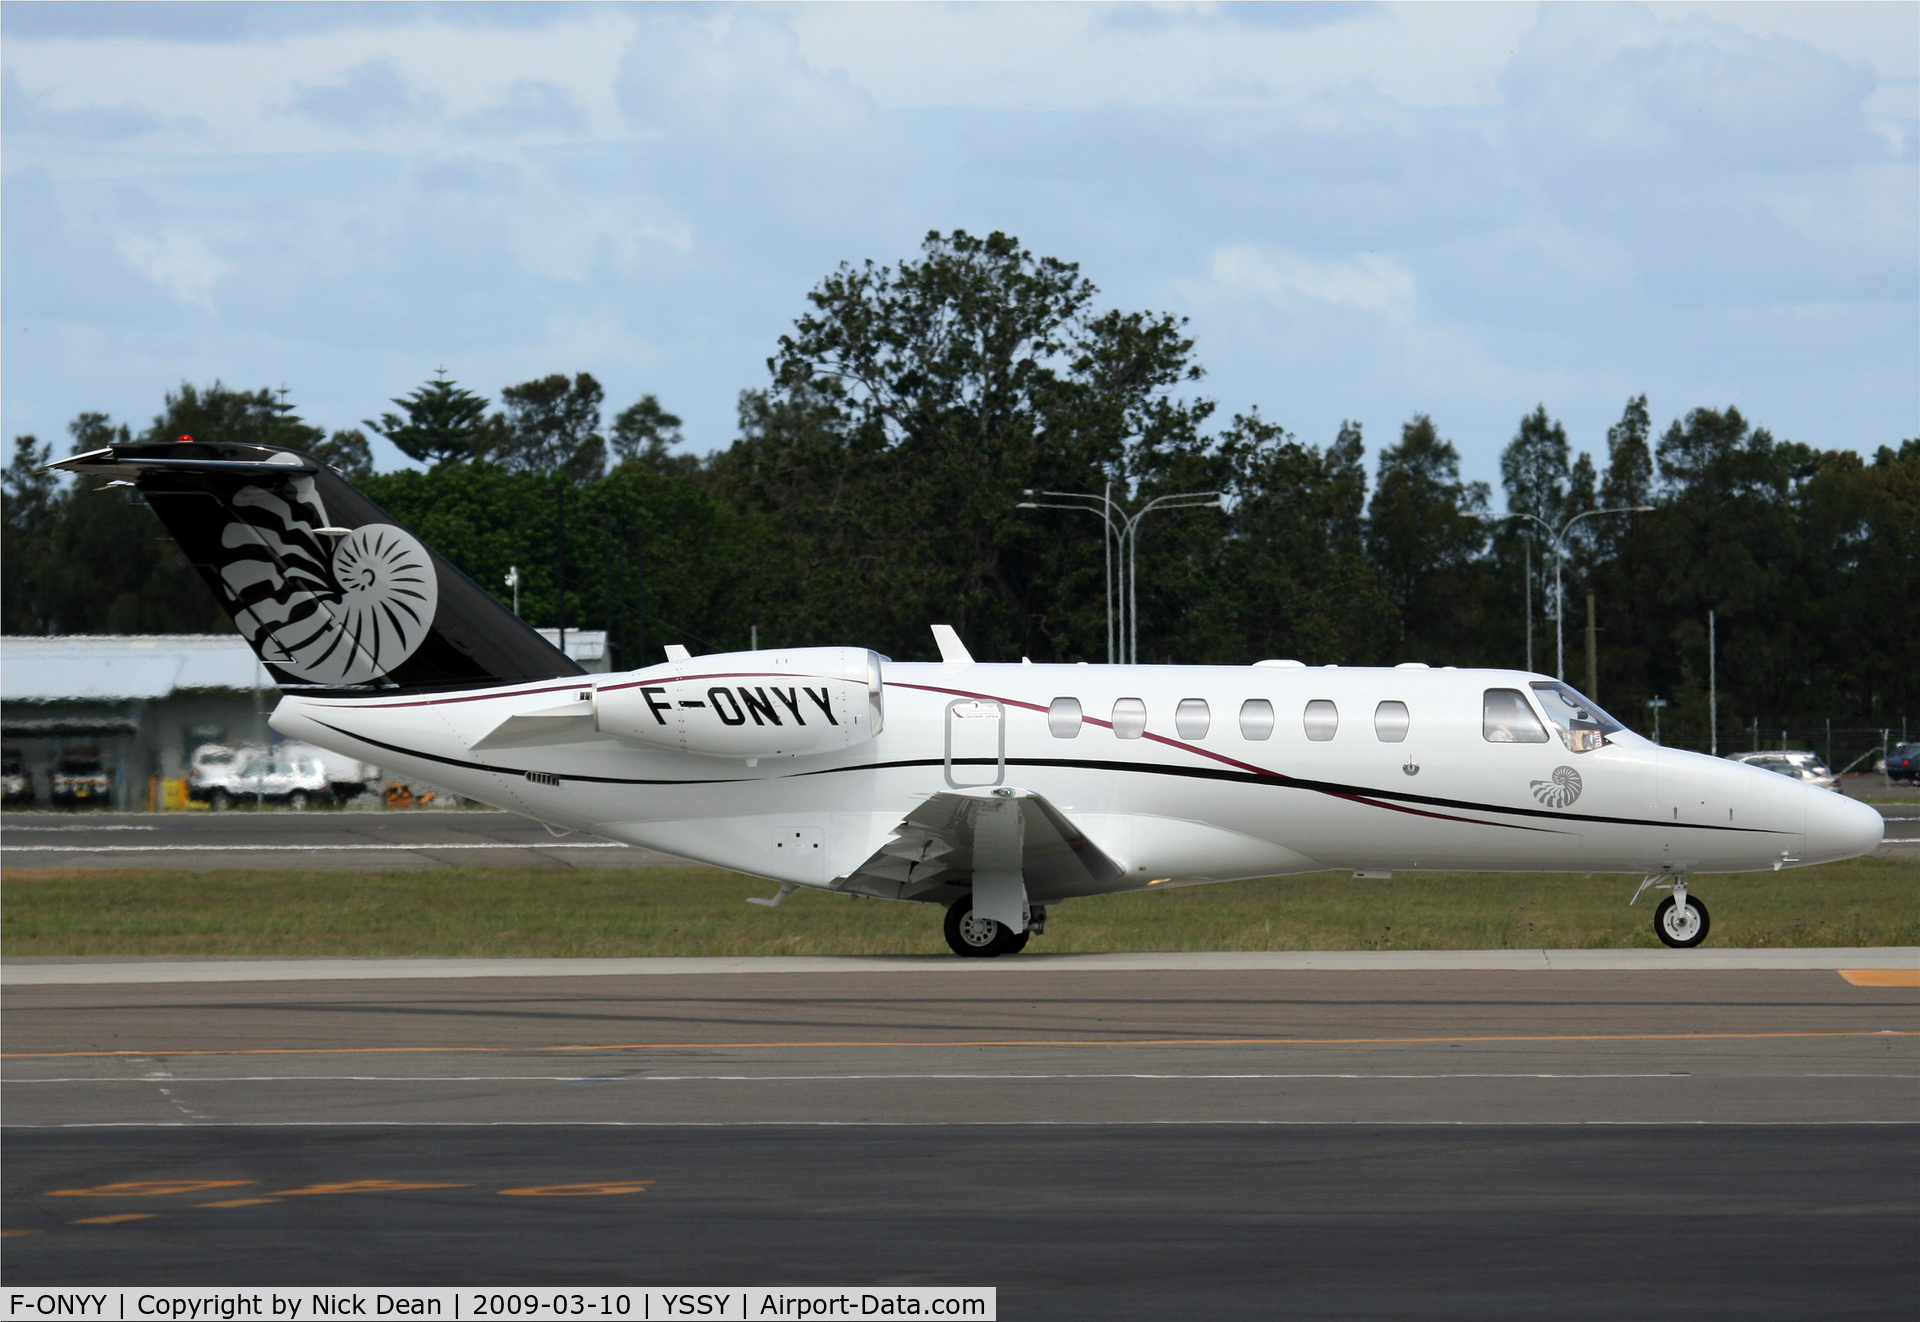 F-ONYY, 2006 Cessna 525A CitationJet CJ2+ C/N 525A-0320, YSSY (Love this scheme with the Nautilus)